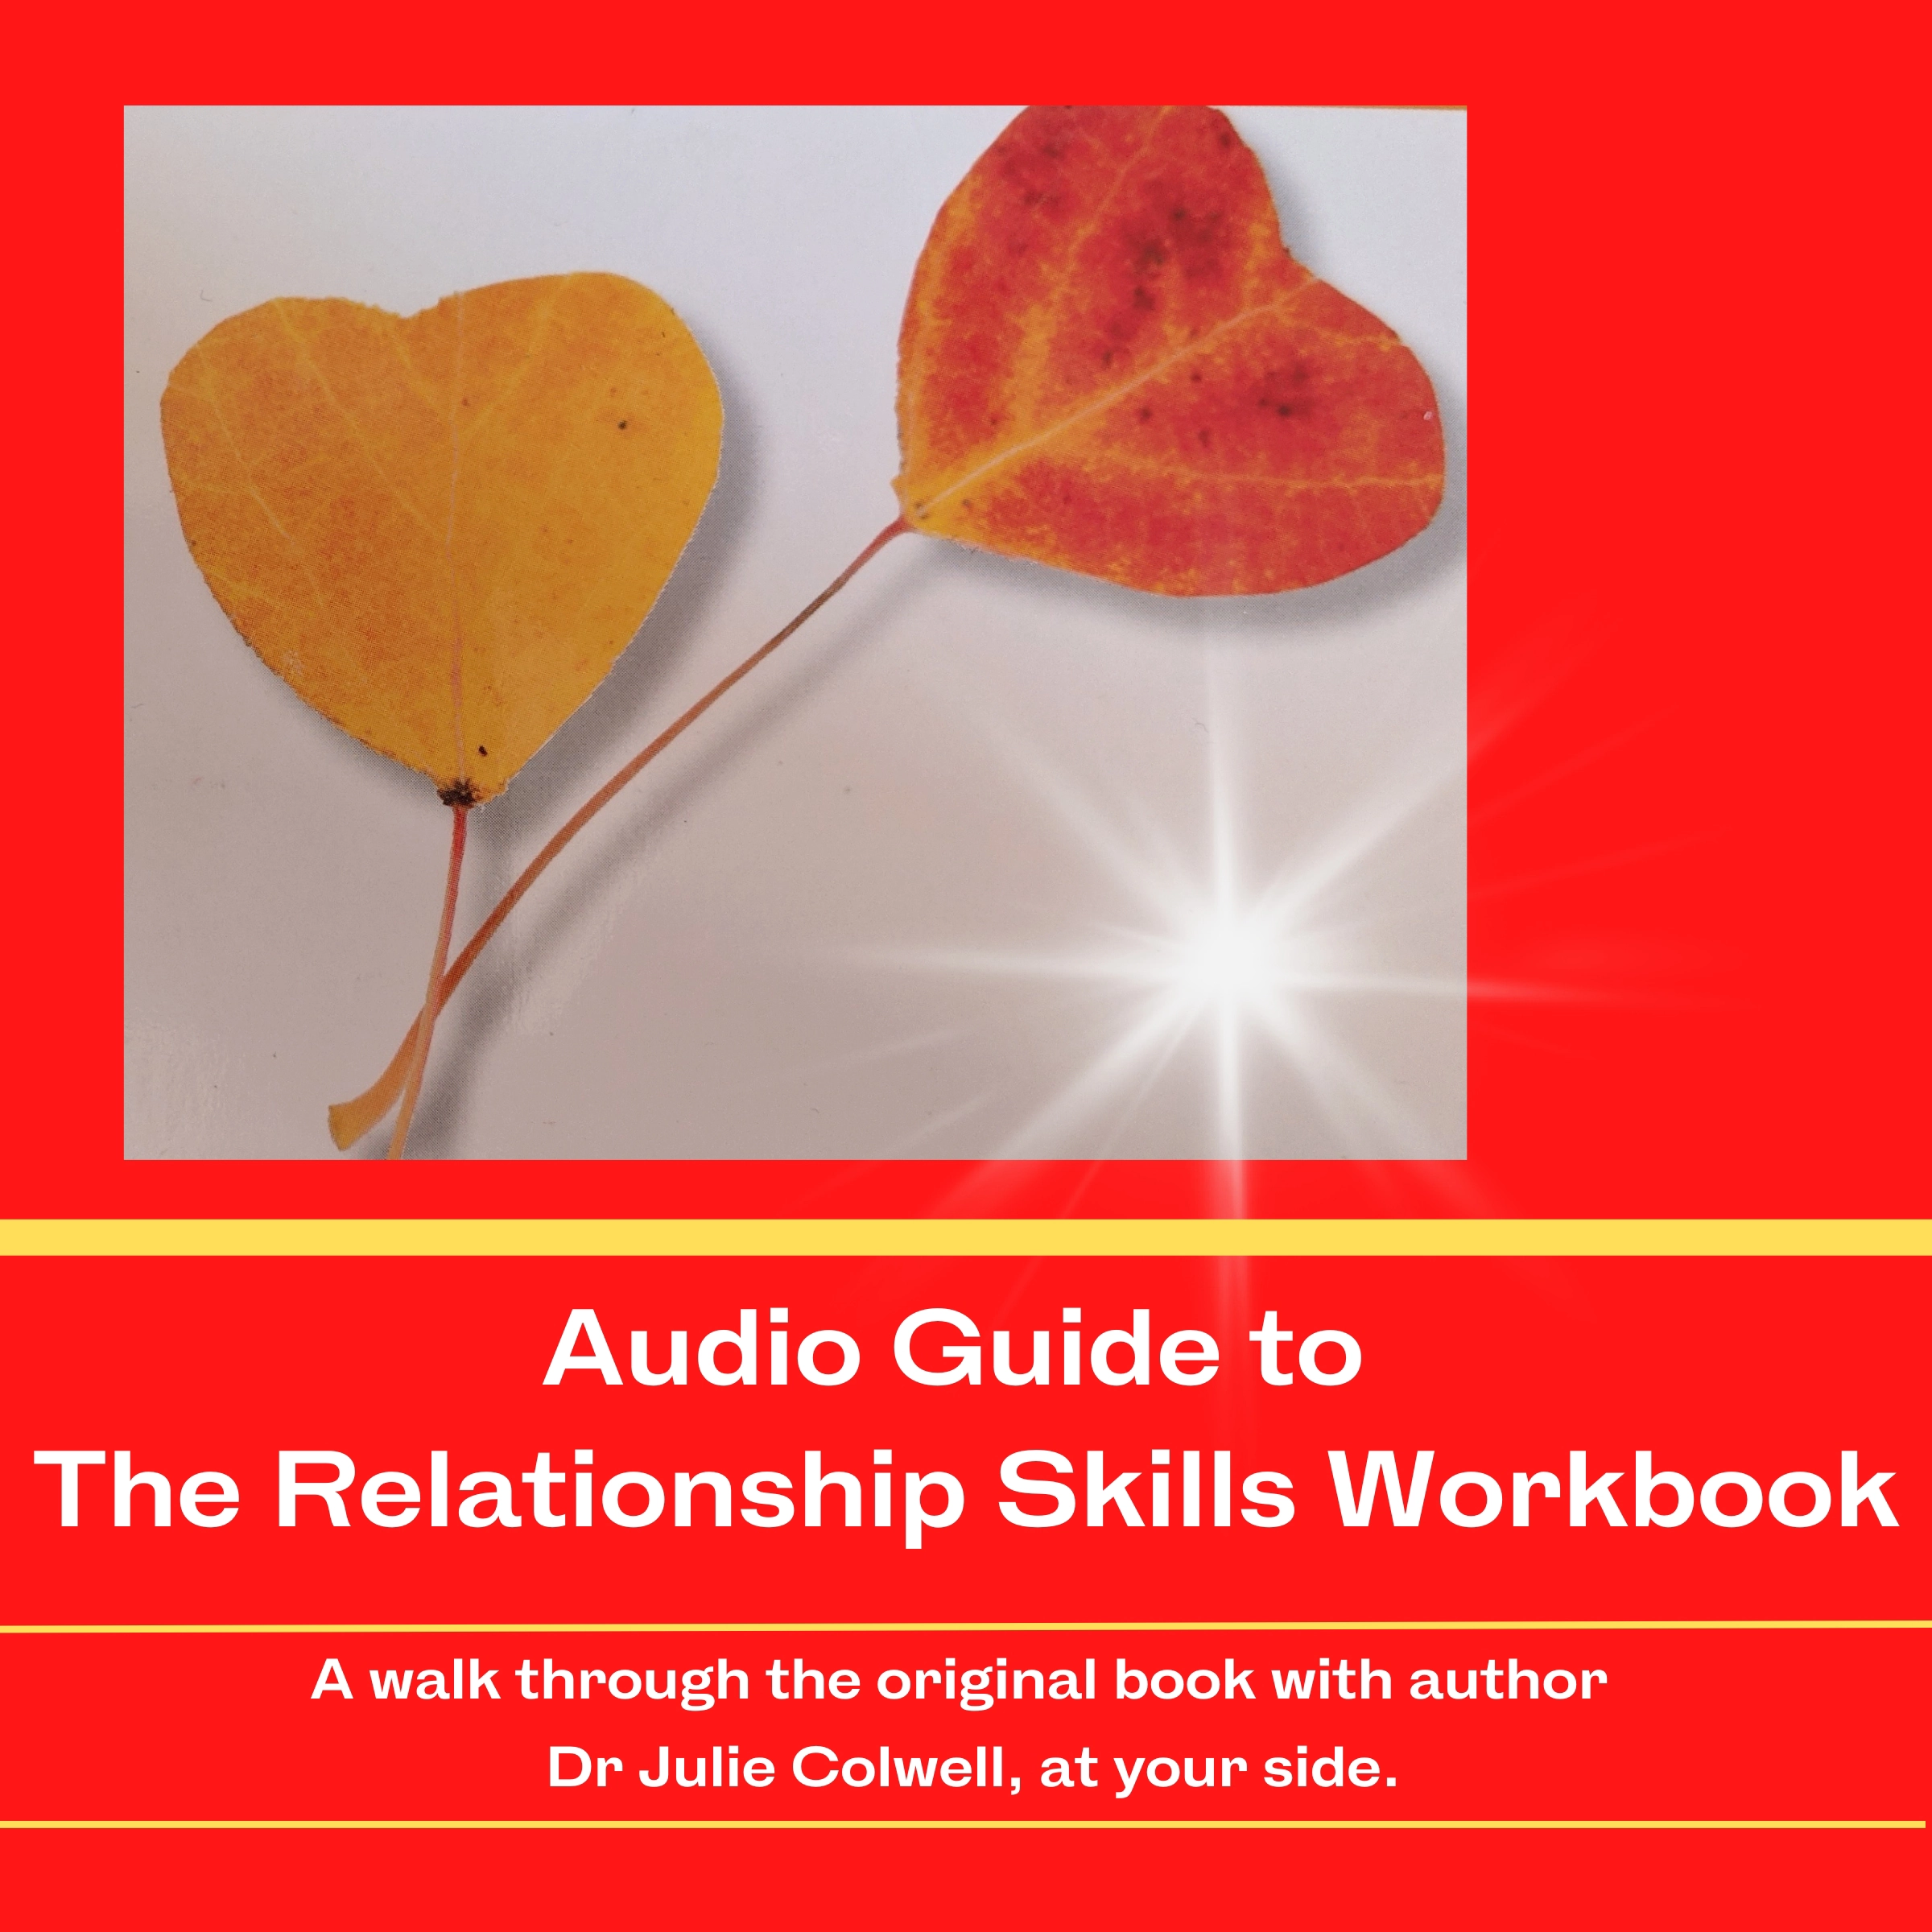 Audio Guide to The Relationship Skills Workbook by Julia B Colwell Ph.D. Audiobook